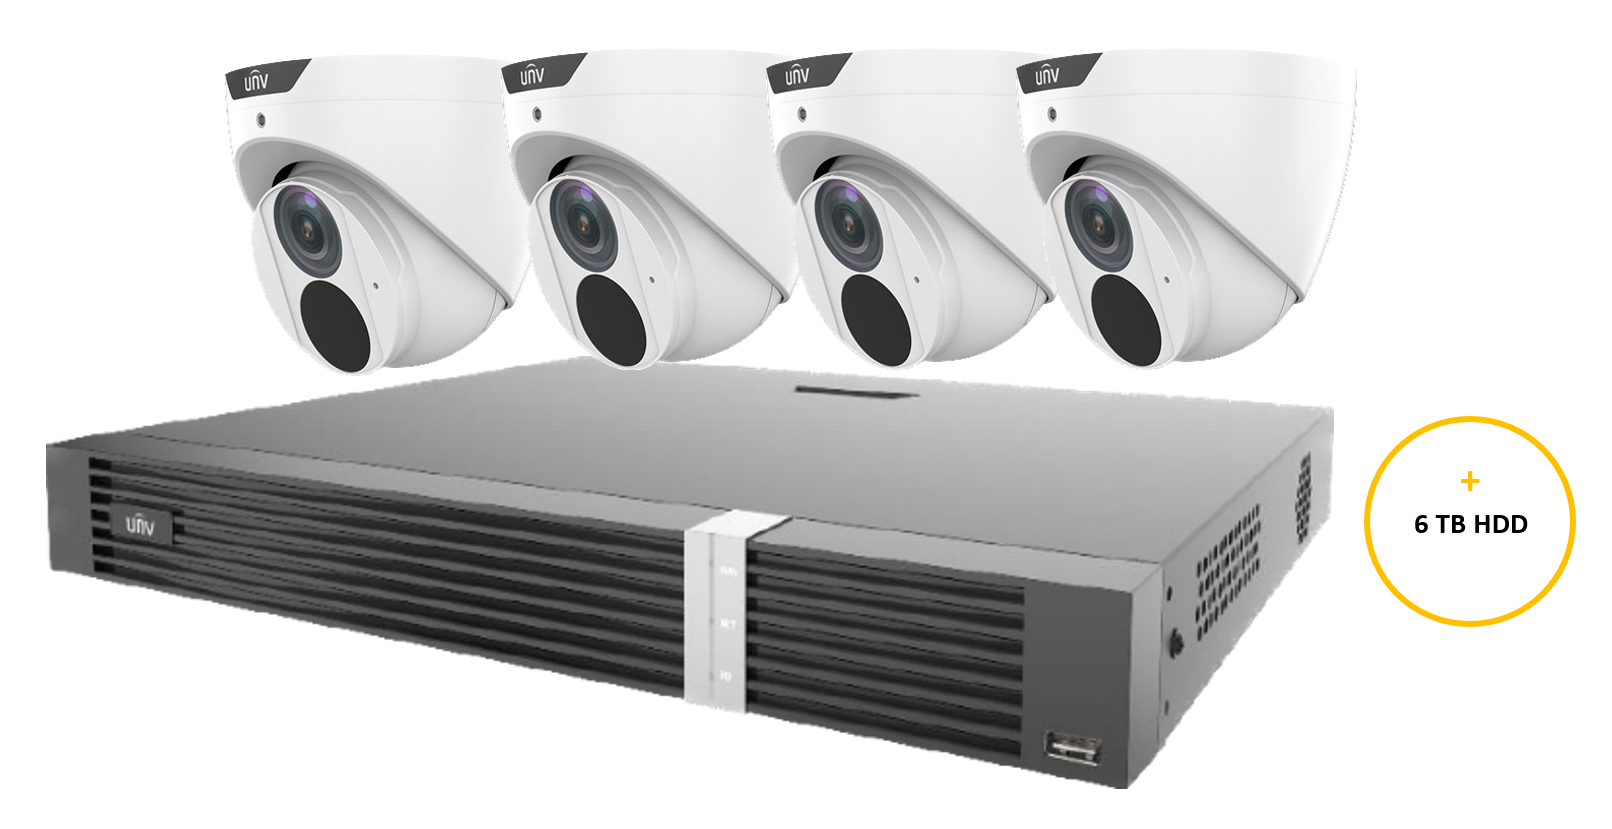 UNIVIEW PRIME-1 KIT INCLUDES 4 x 8MP WHITE PRIME-1 TURRET CAMERAS 2.8MM (UNVIPC3618SB-ADF28KM-I0) 8 CHANNEL BLACK NVR (UNVNVR302-08E2-P8-IQ) EXPANDABLE HDD WITH 6TB HDD NOT LOADED